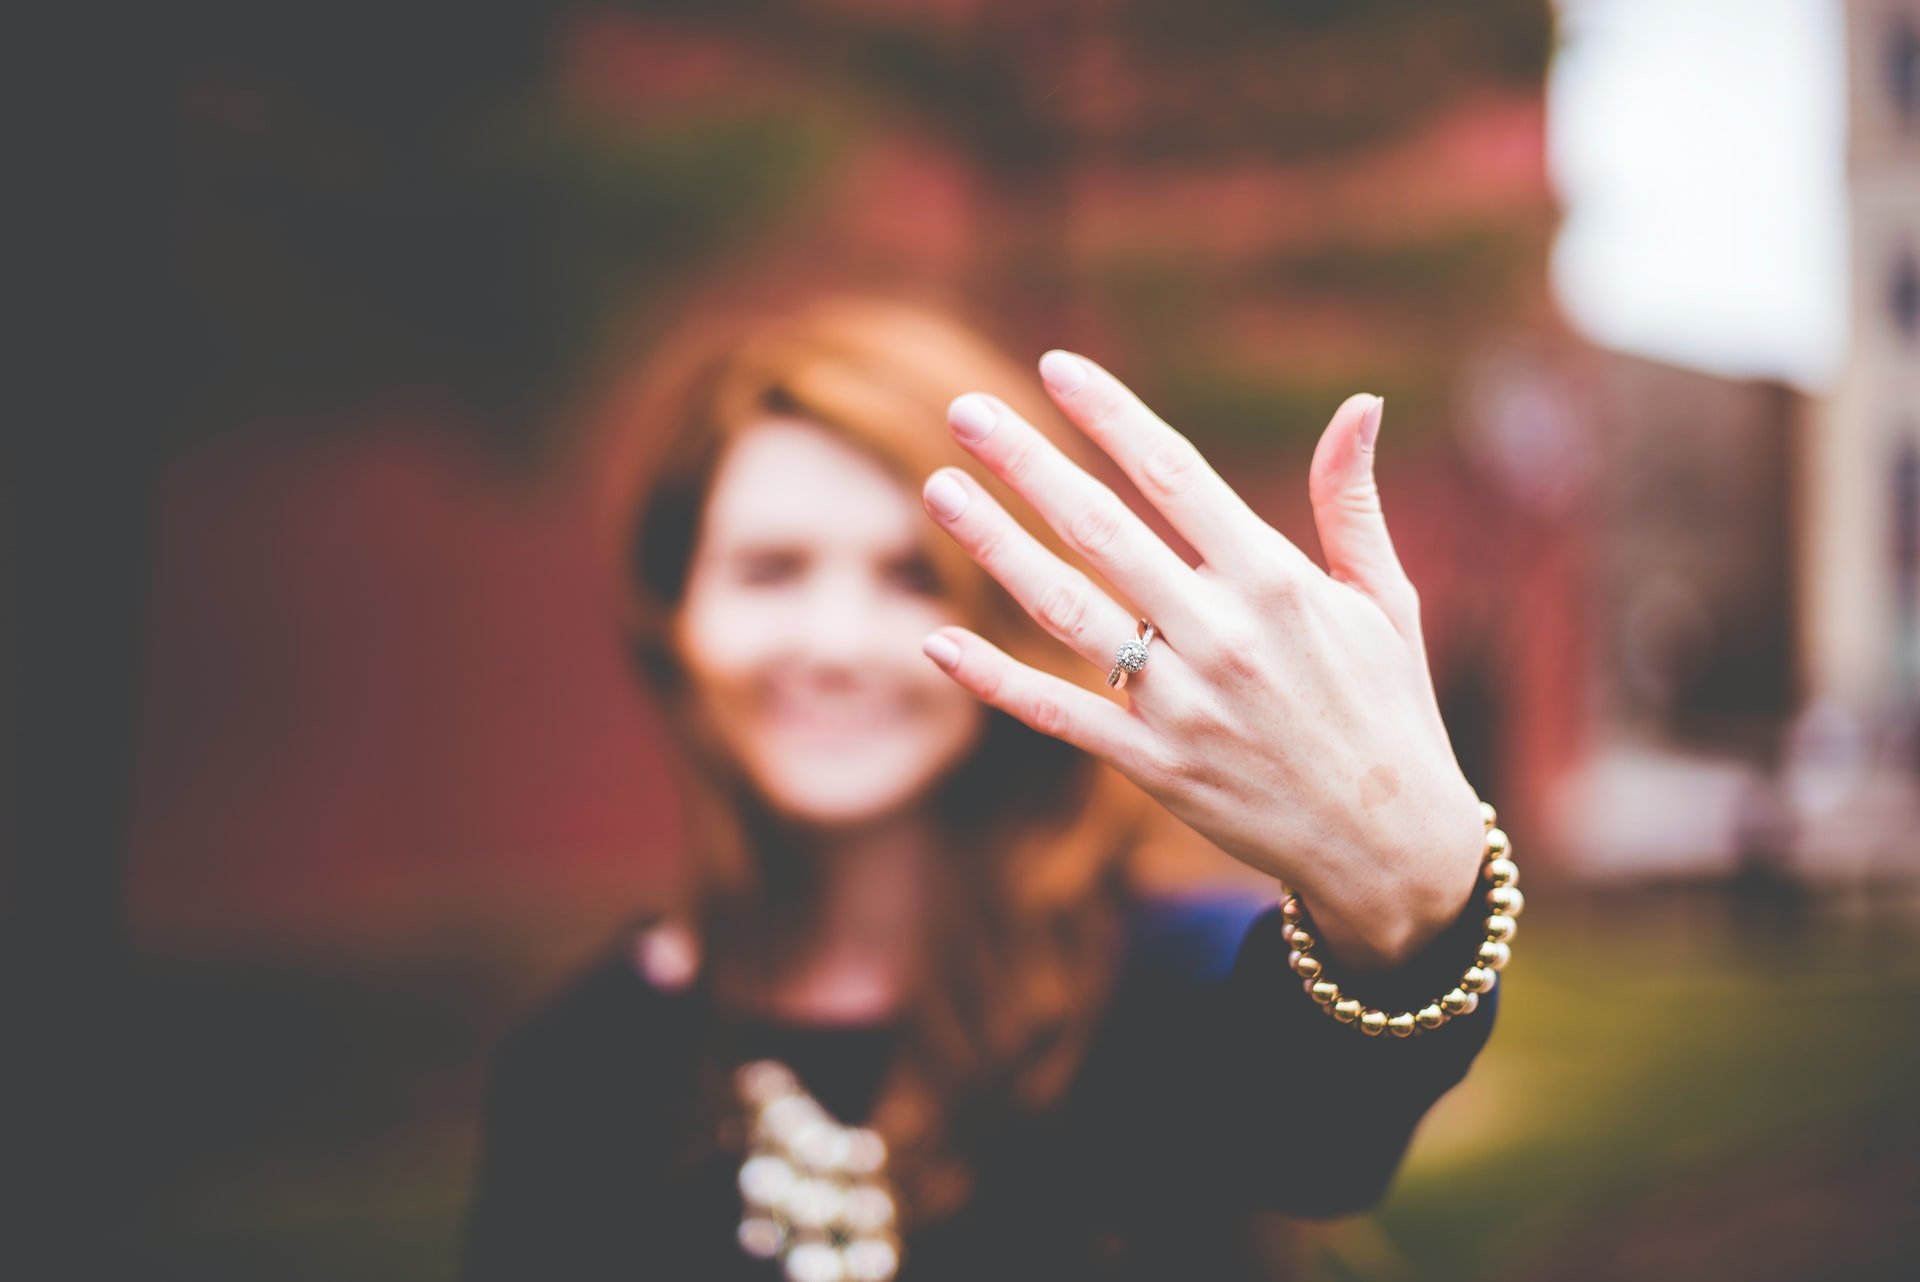 OP was happy to get her ring back | Source: Unsplash